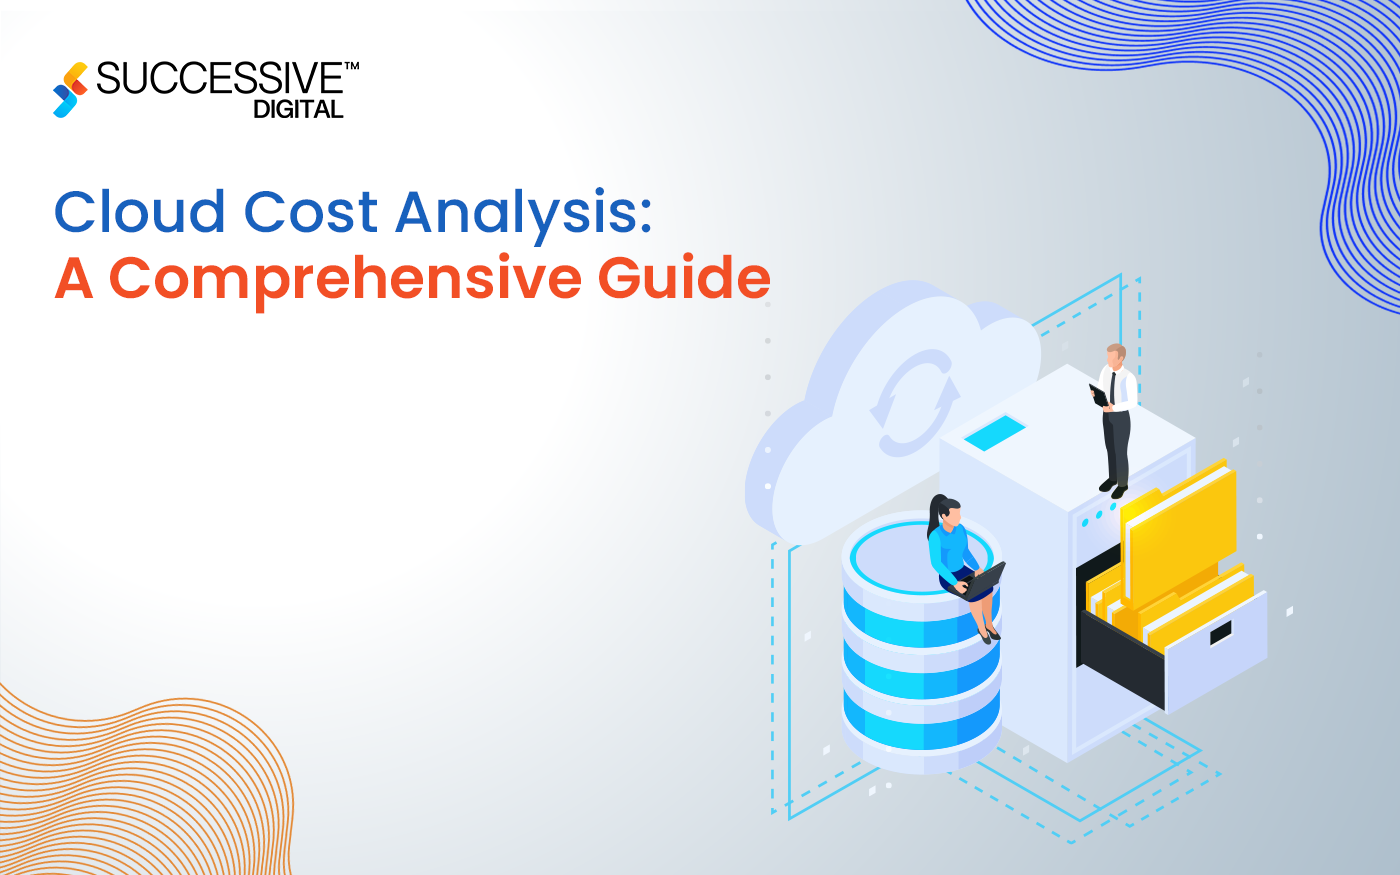 Cloud Cost Analysis: A Comprehensive Guide